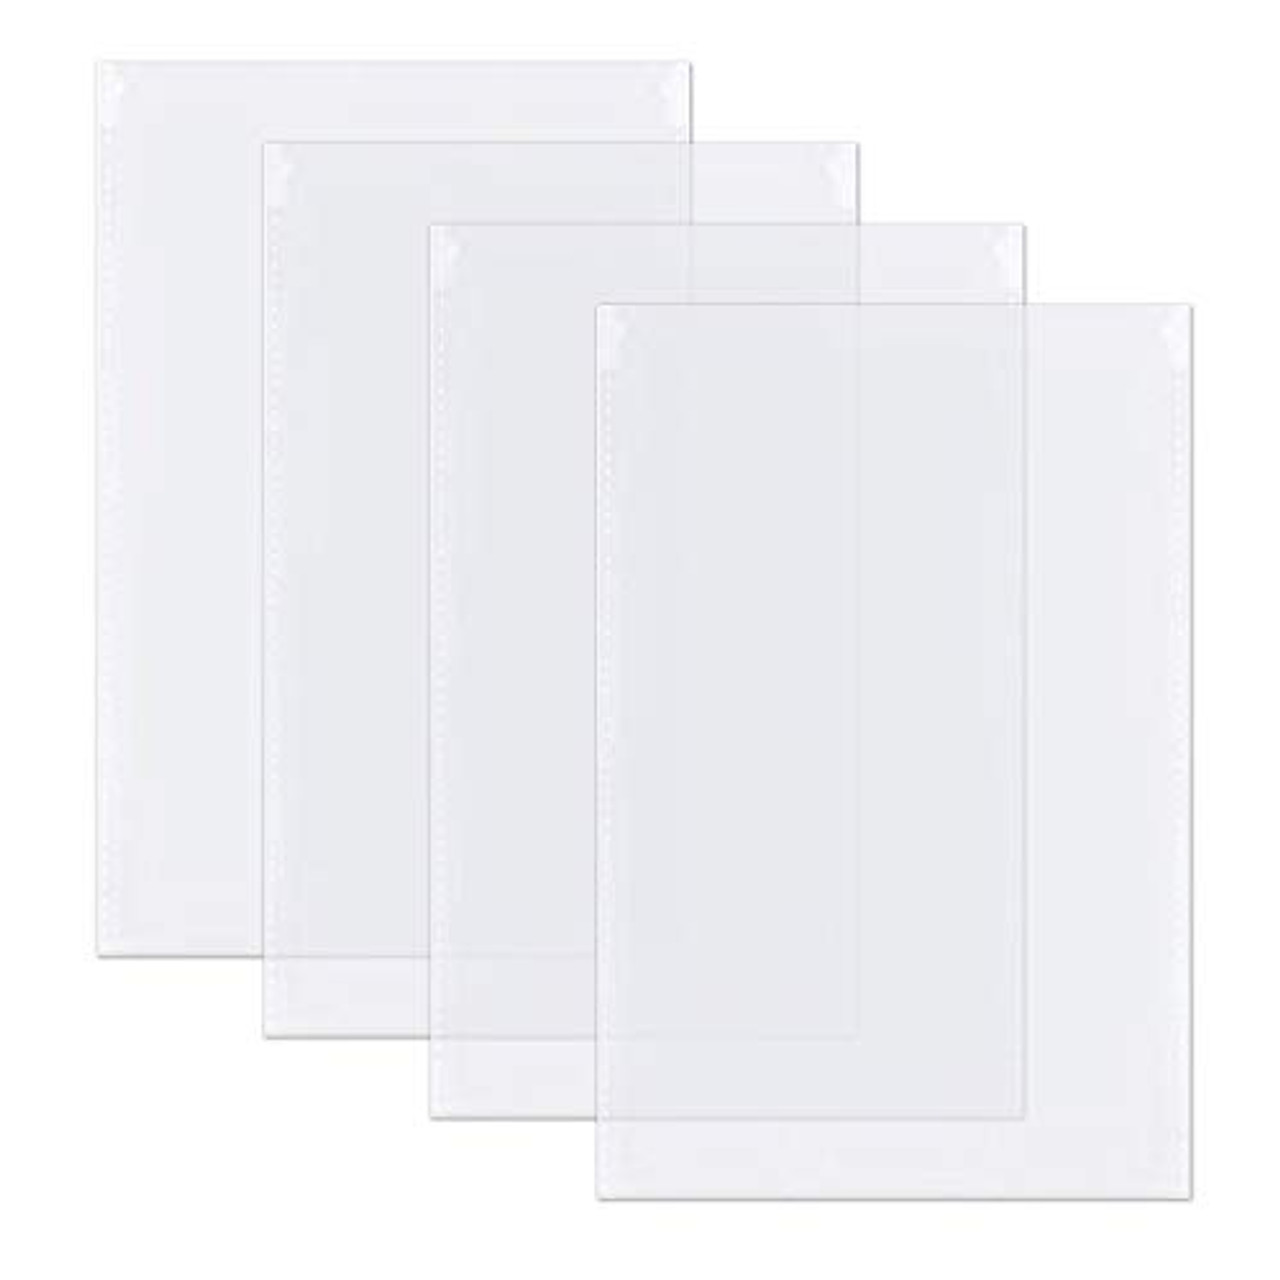 100 Pcs 11x14 Inch Clear Flat Cello Cellophane Bags Opp Bag for Bakery for sale online Approx 